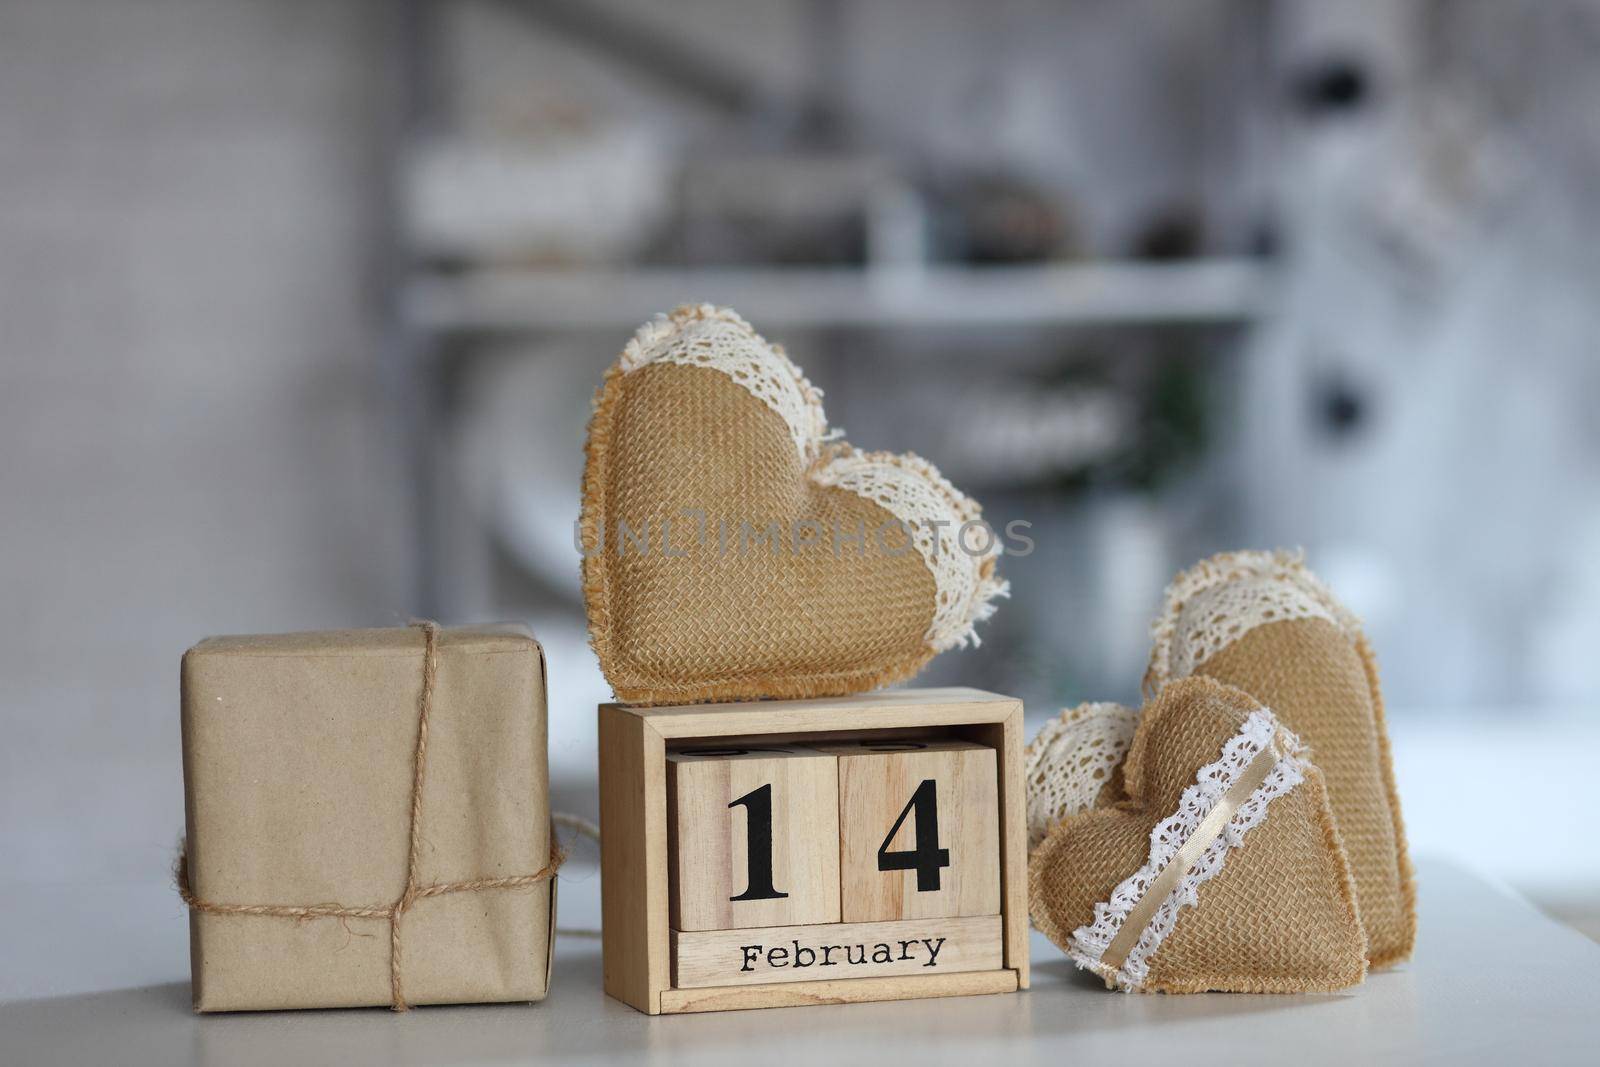 Valentines day concept. heart beside wooden block calendar set on Valentines date 14 February on table and bright room background. by IvanGalashchuk